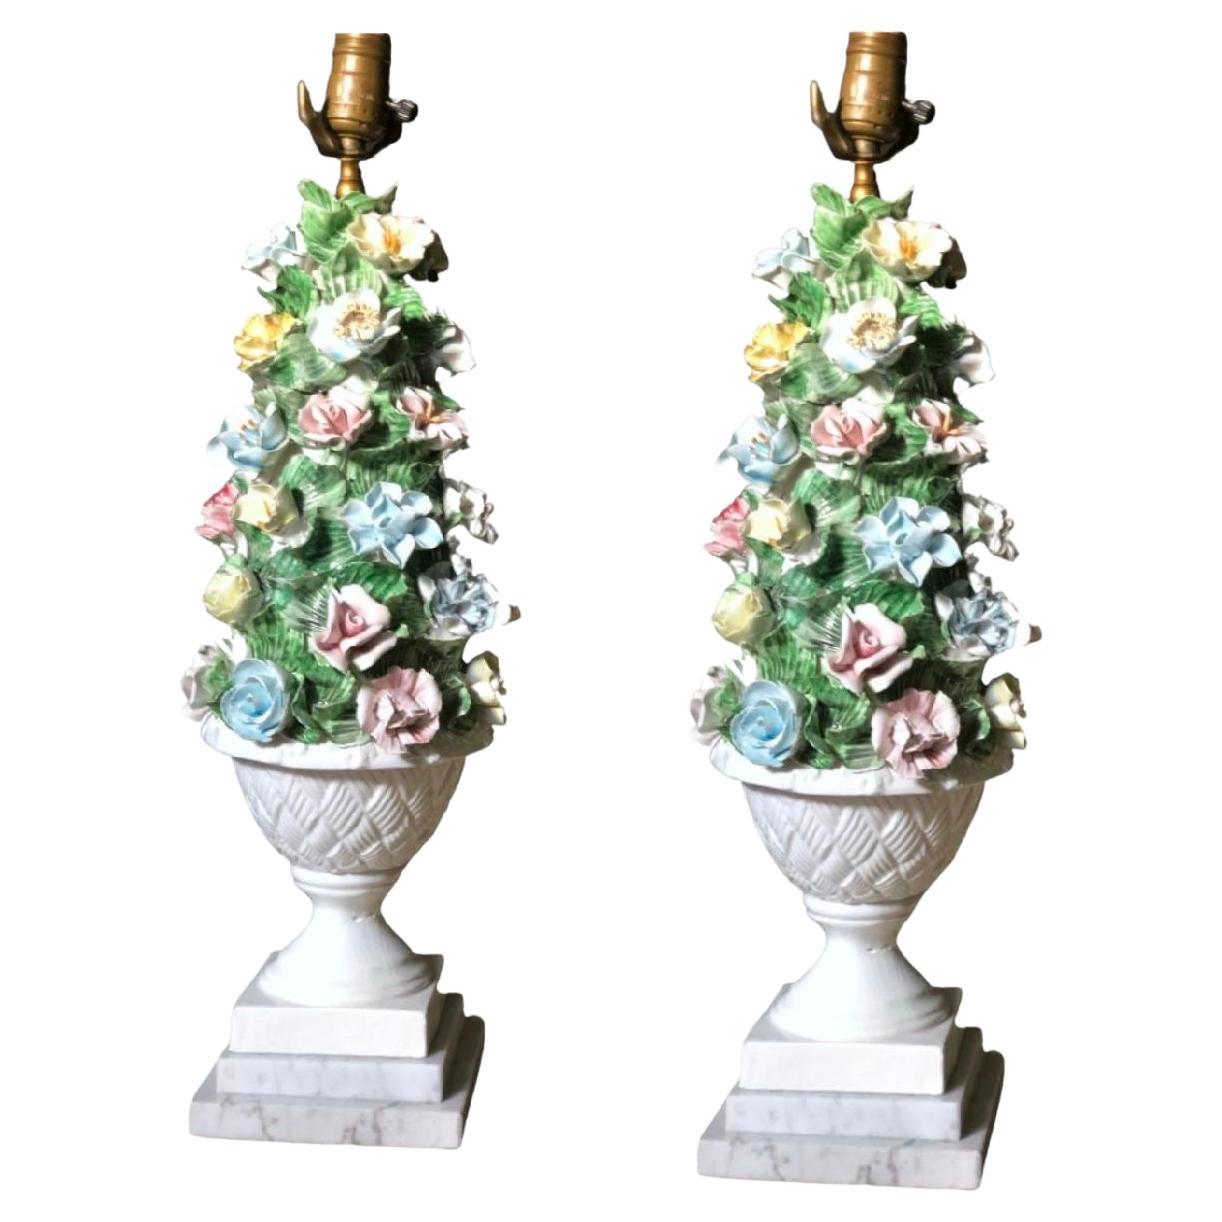 Midcentury Italian modern capodimonte porcelain topiary floral table lamps. Gorgeous handmade midcentury soft-paste Neapolitan porcelain topiary lamps with stunning use of color and overall whimsy. This listing is for the pair. 



  